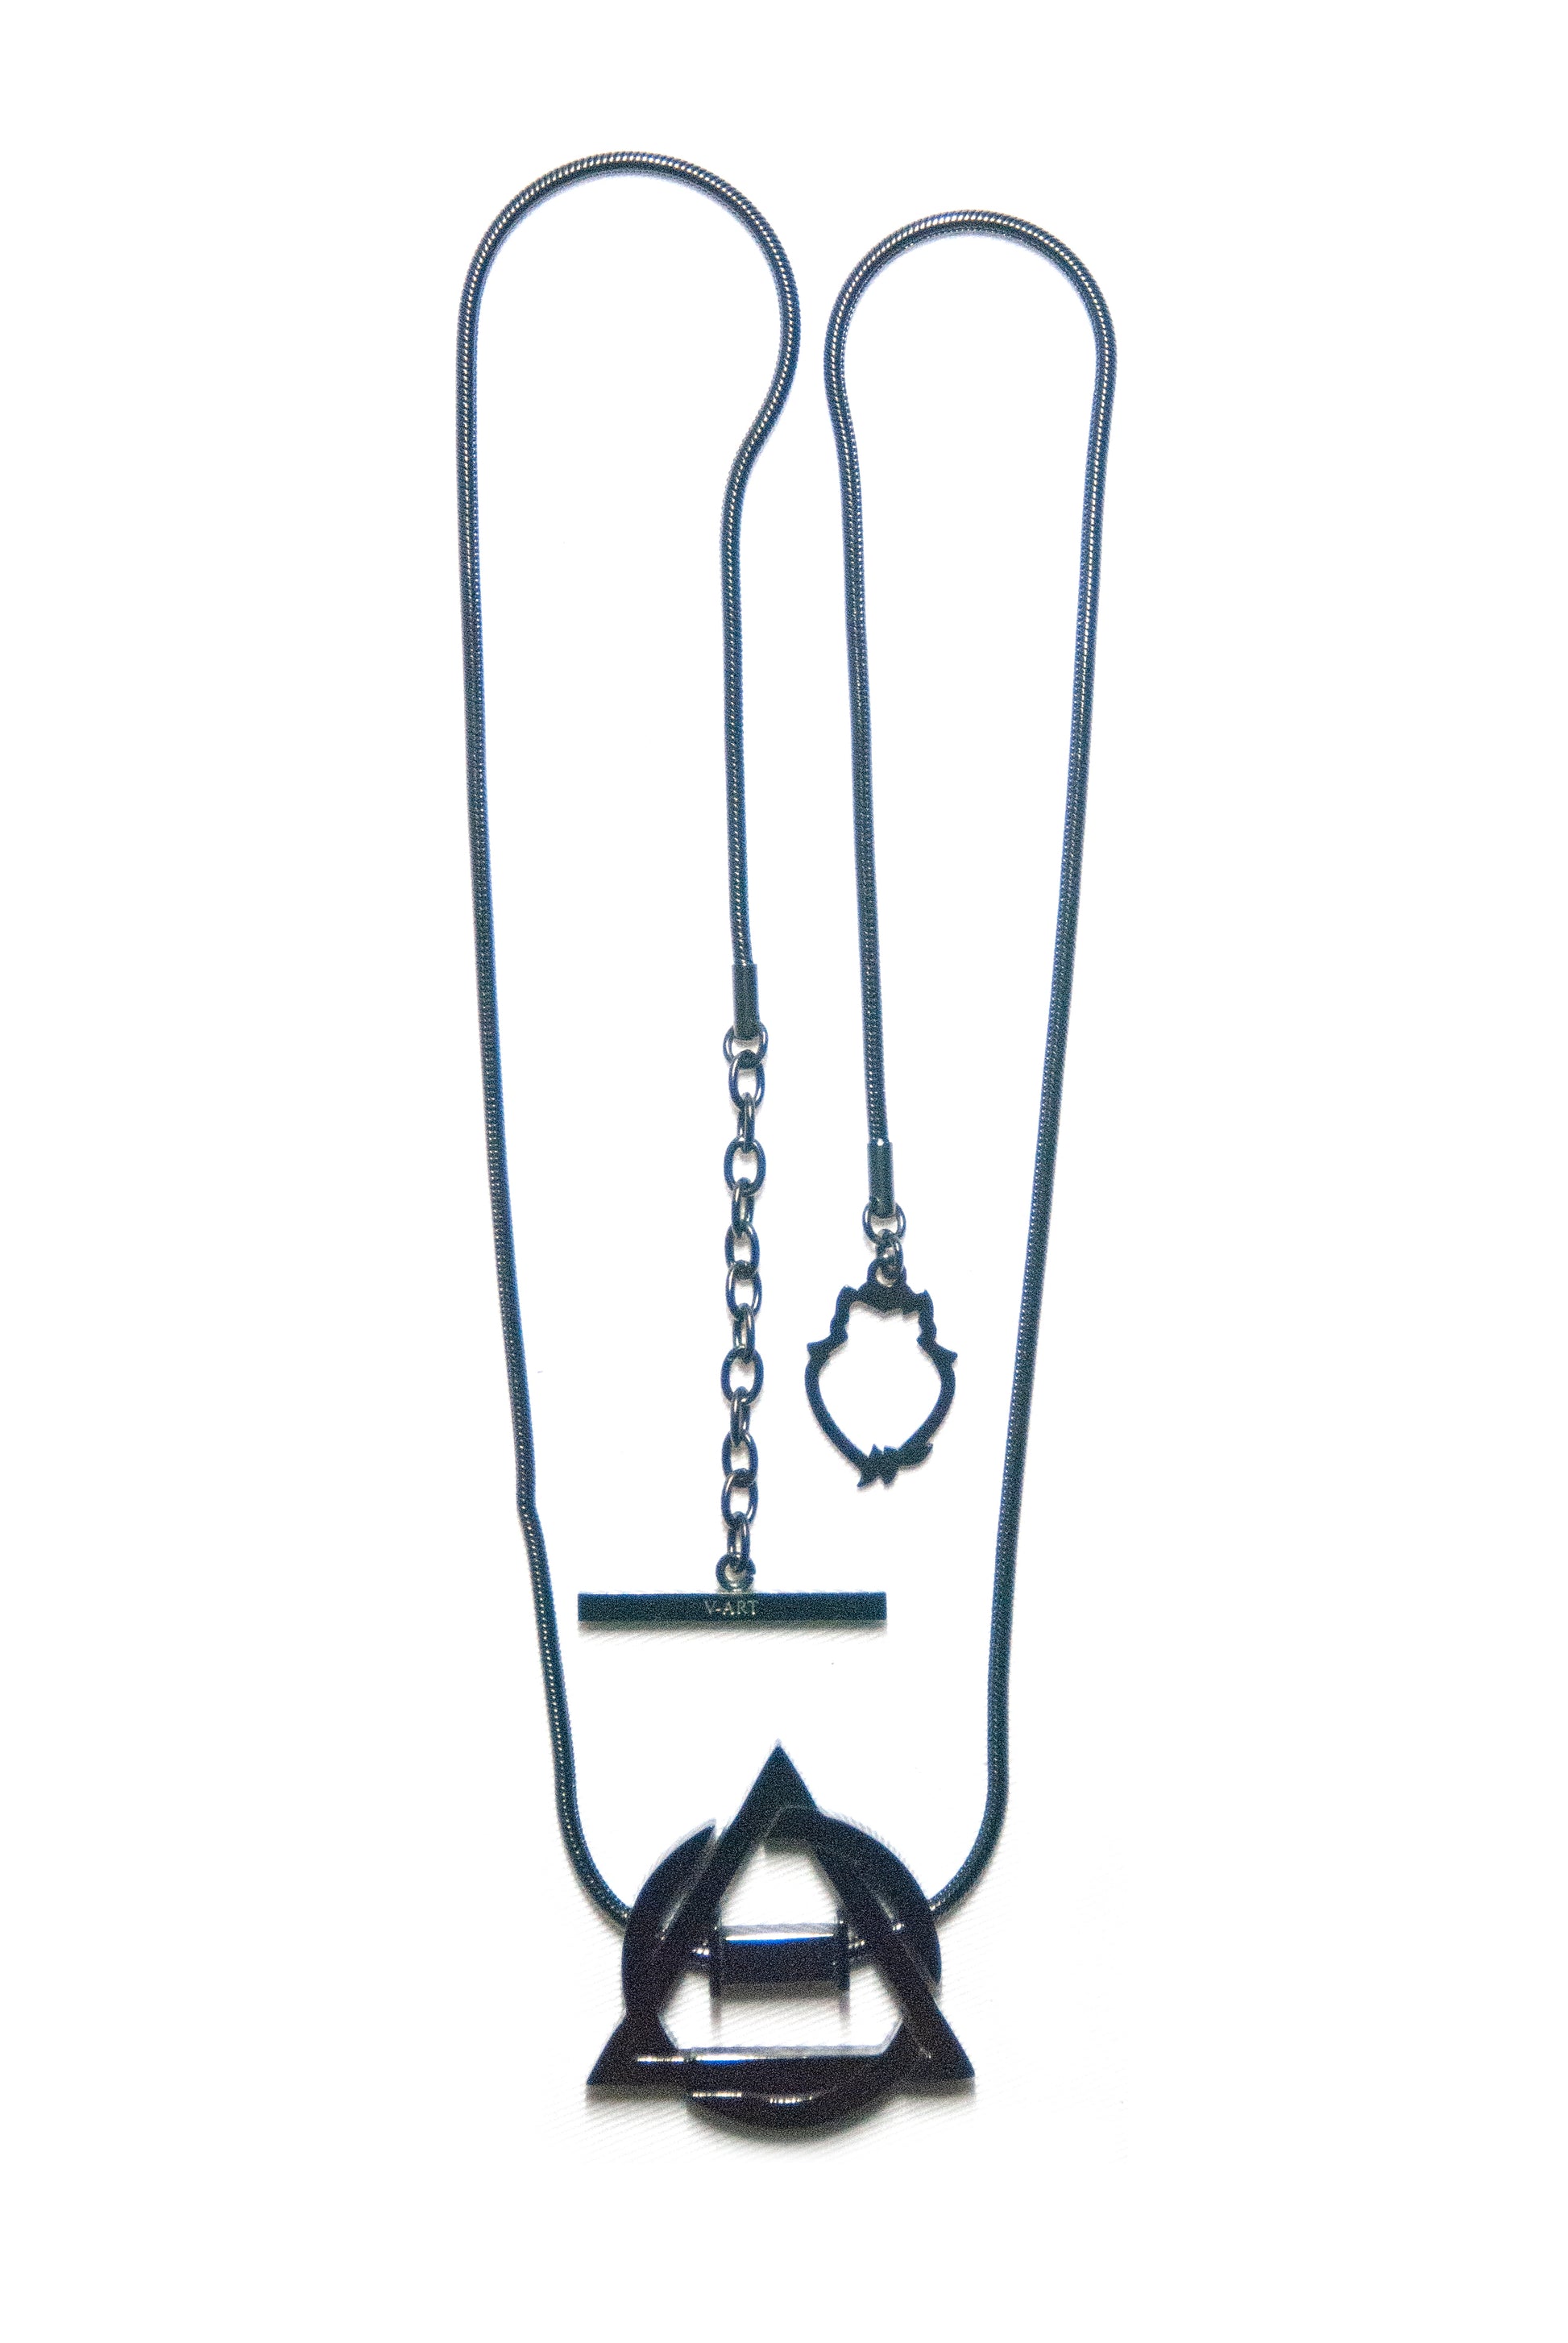 **PRE-ORDER** Therian Necklace: Black Jewellery